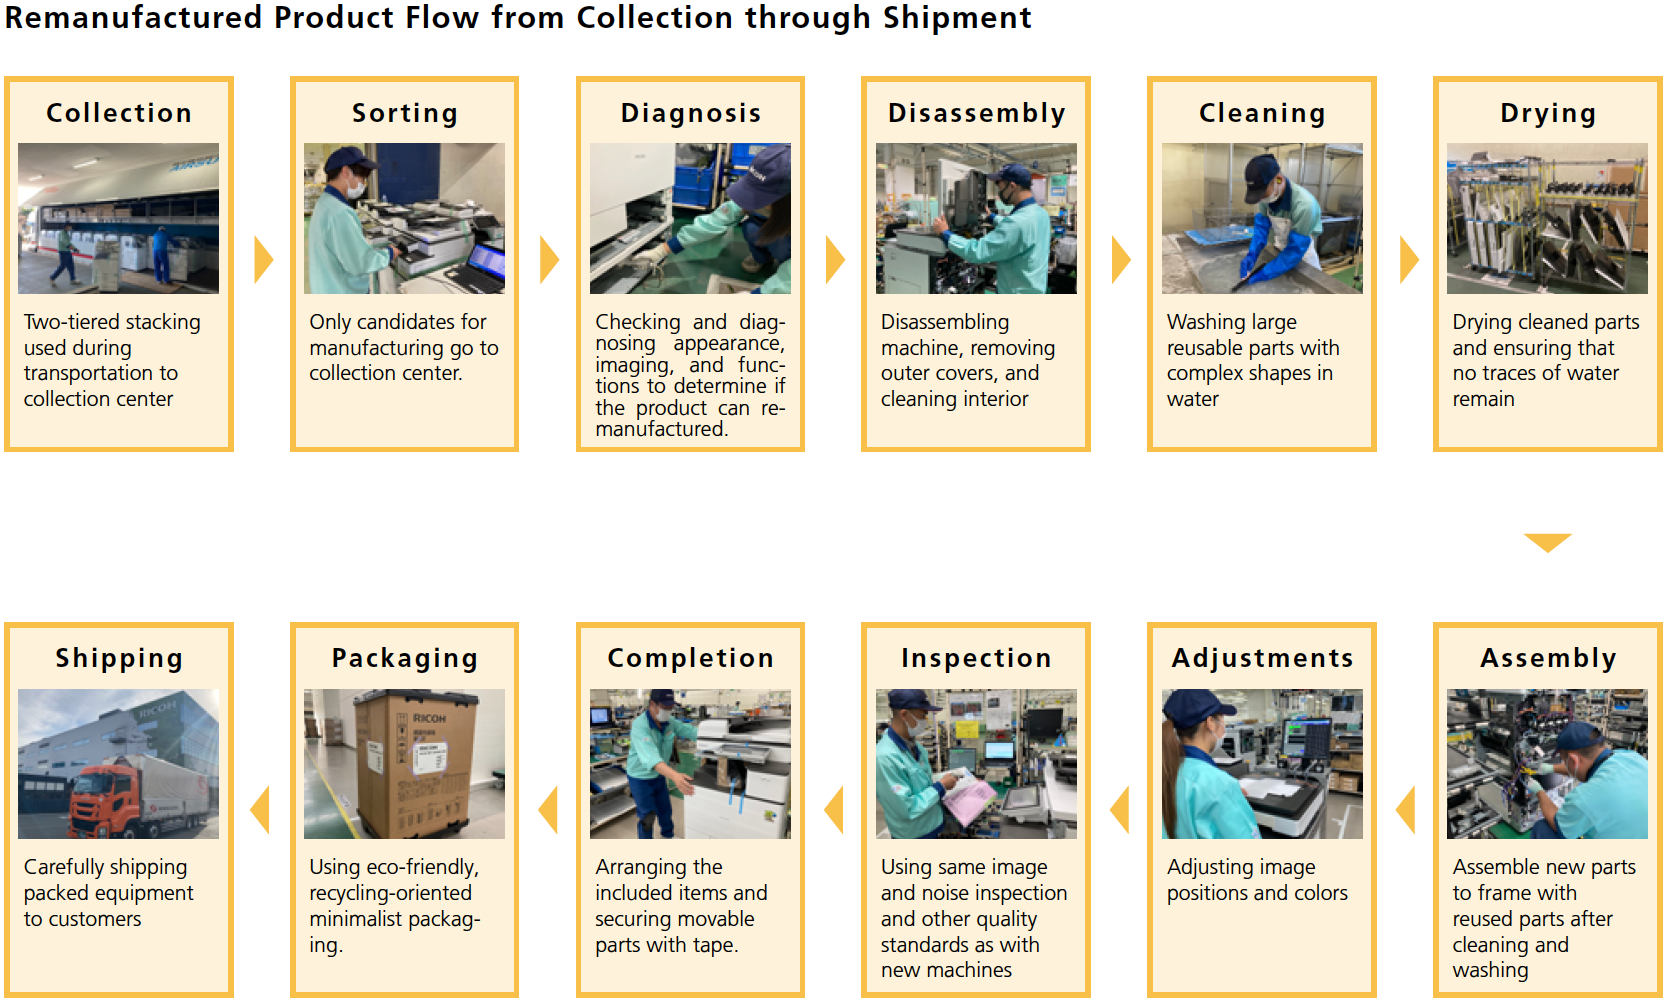 Image: Remanufactured Product Flow from Collection through